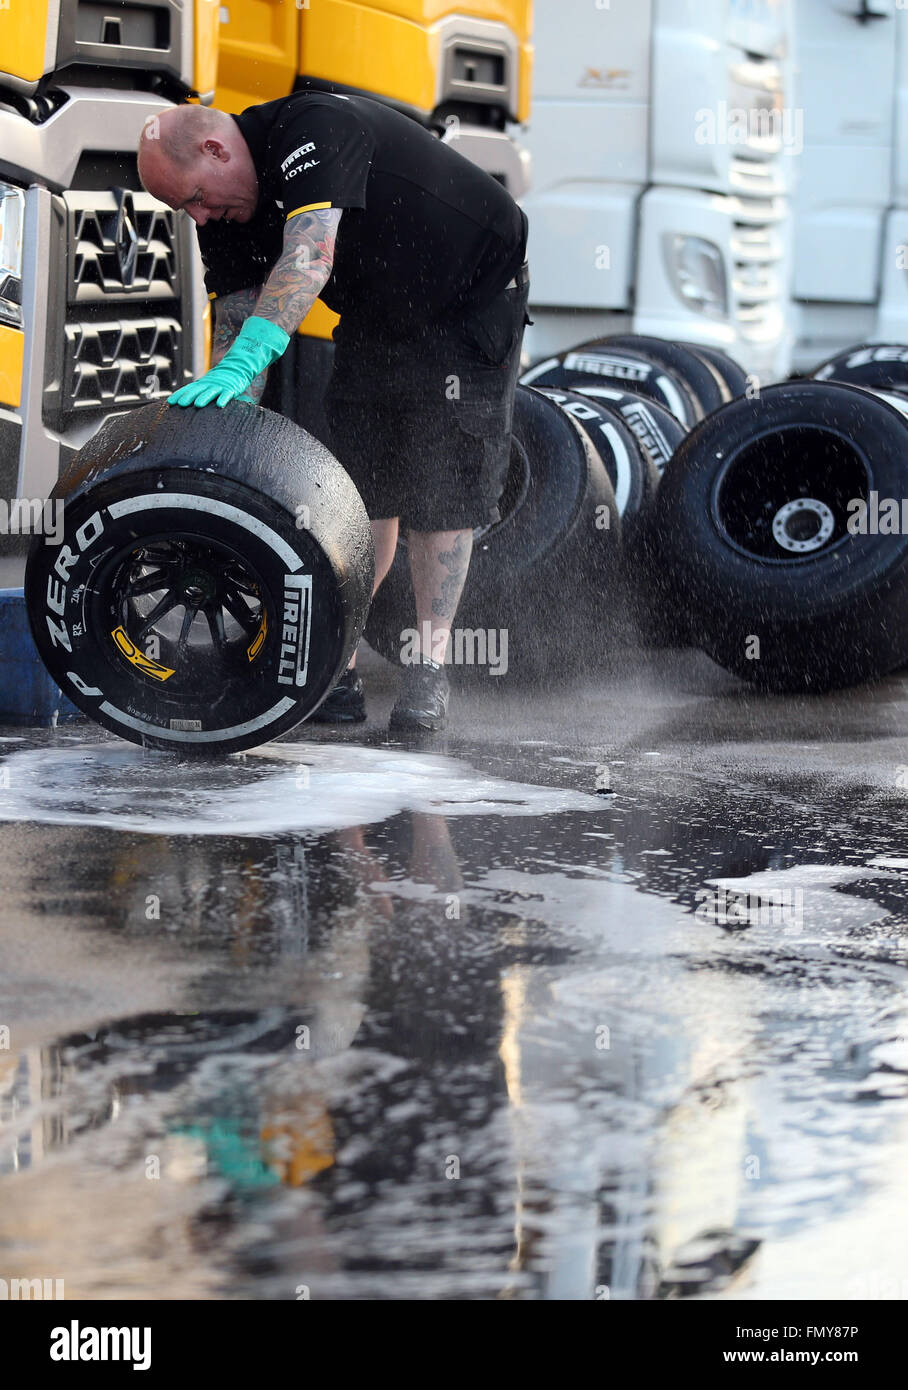 Racing tires from Pirelli seen during the training session for the upcoming Formula One season at the Circuit de Barcelona - Catalunya in Barcelona, Spain, 24 February 2016. Photo: Jens Buettner/dpa Stock Photo